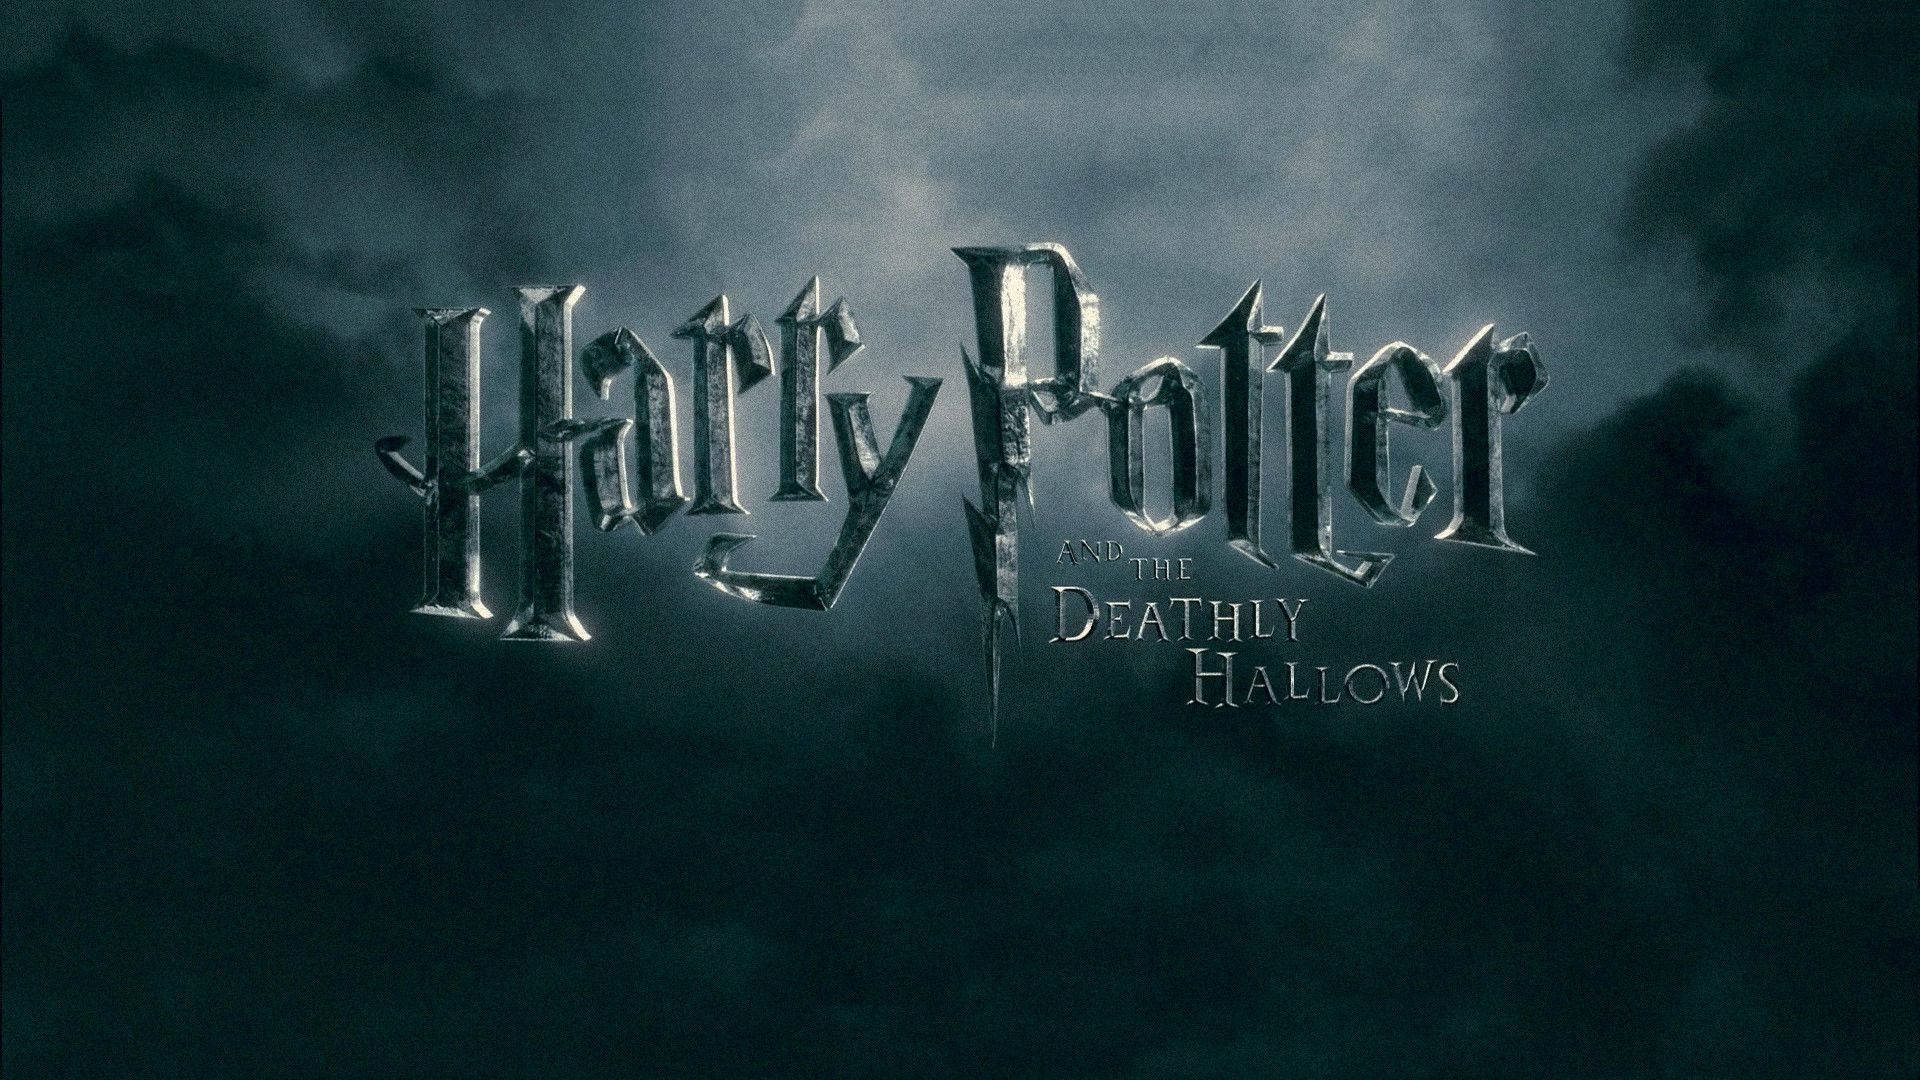 Harry Potter and the Deathly Hallows Part 2 Wallpaper 3  Flickr